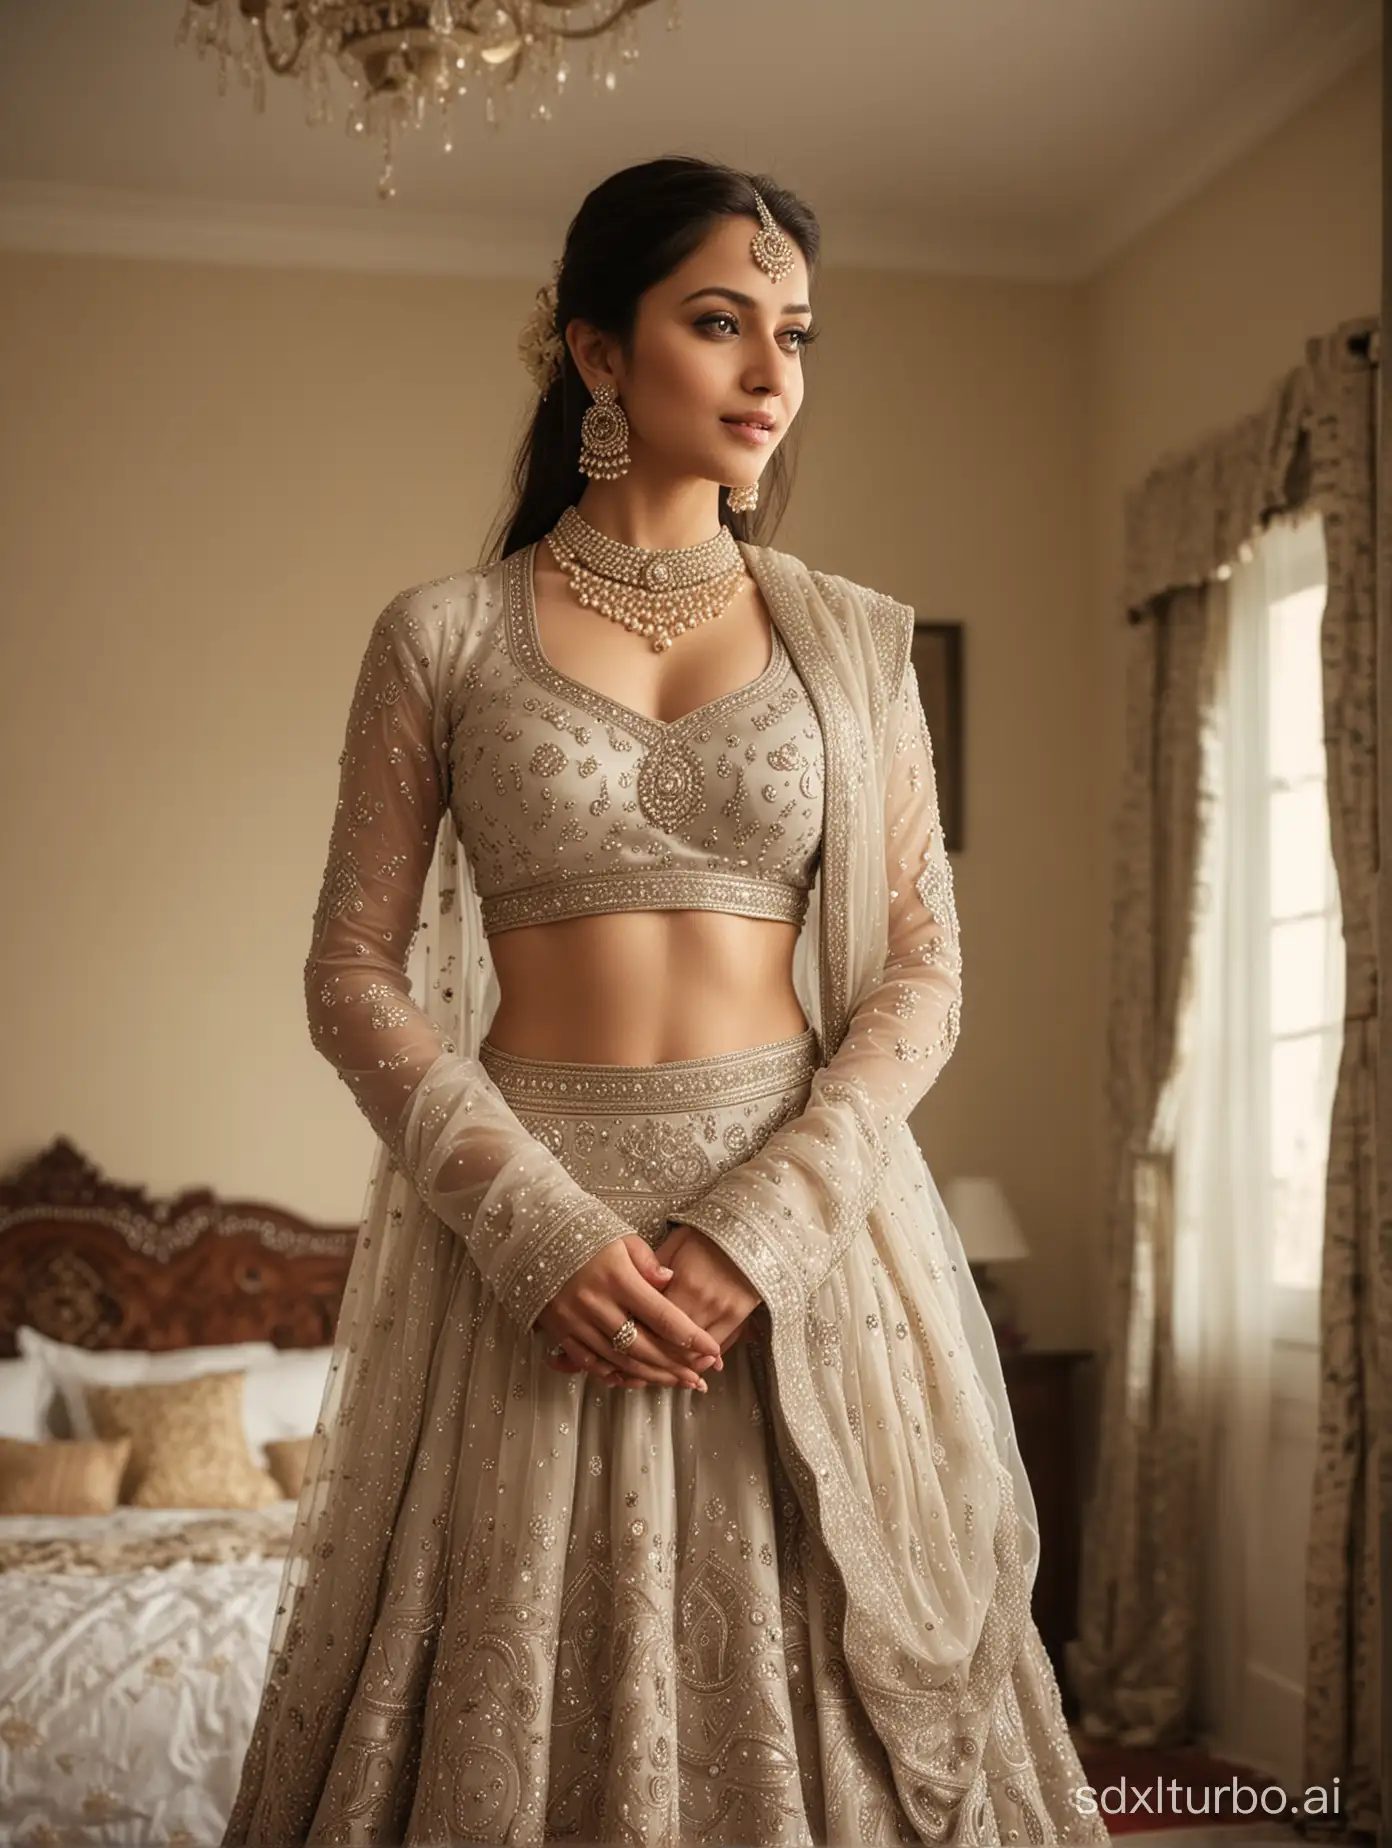 Indian-Lady-in-Silver-Jewelry-and-Pichwai-Motif-Lehenga-in-Traditional-Bedroom